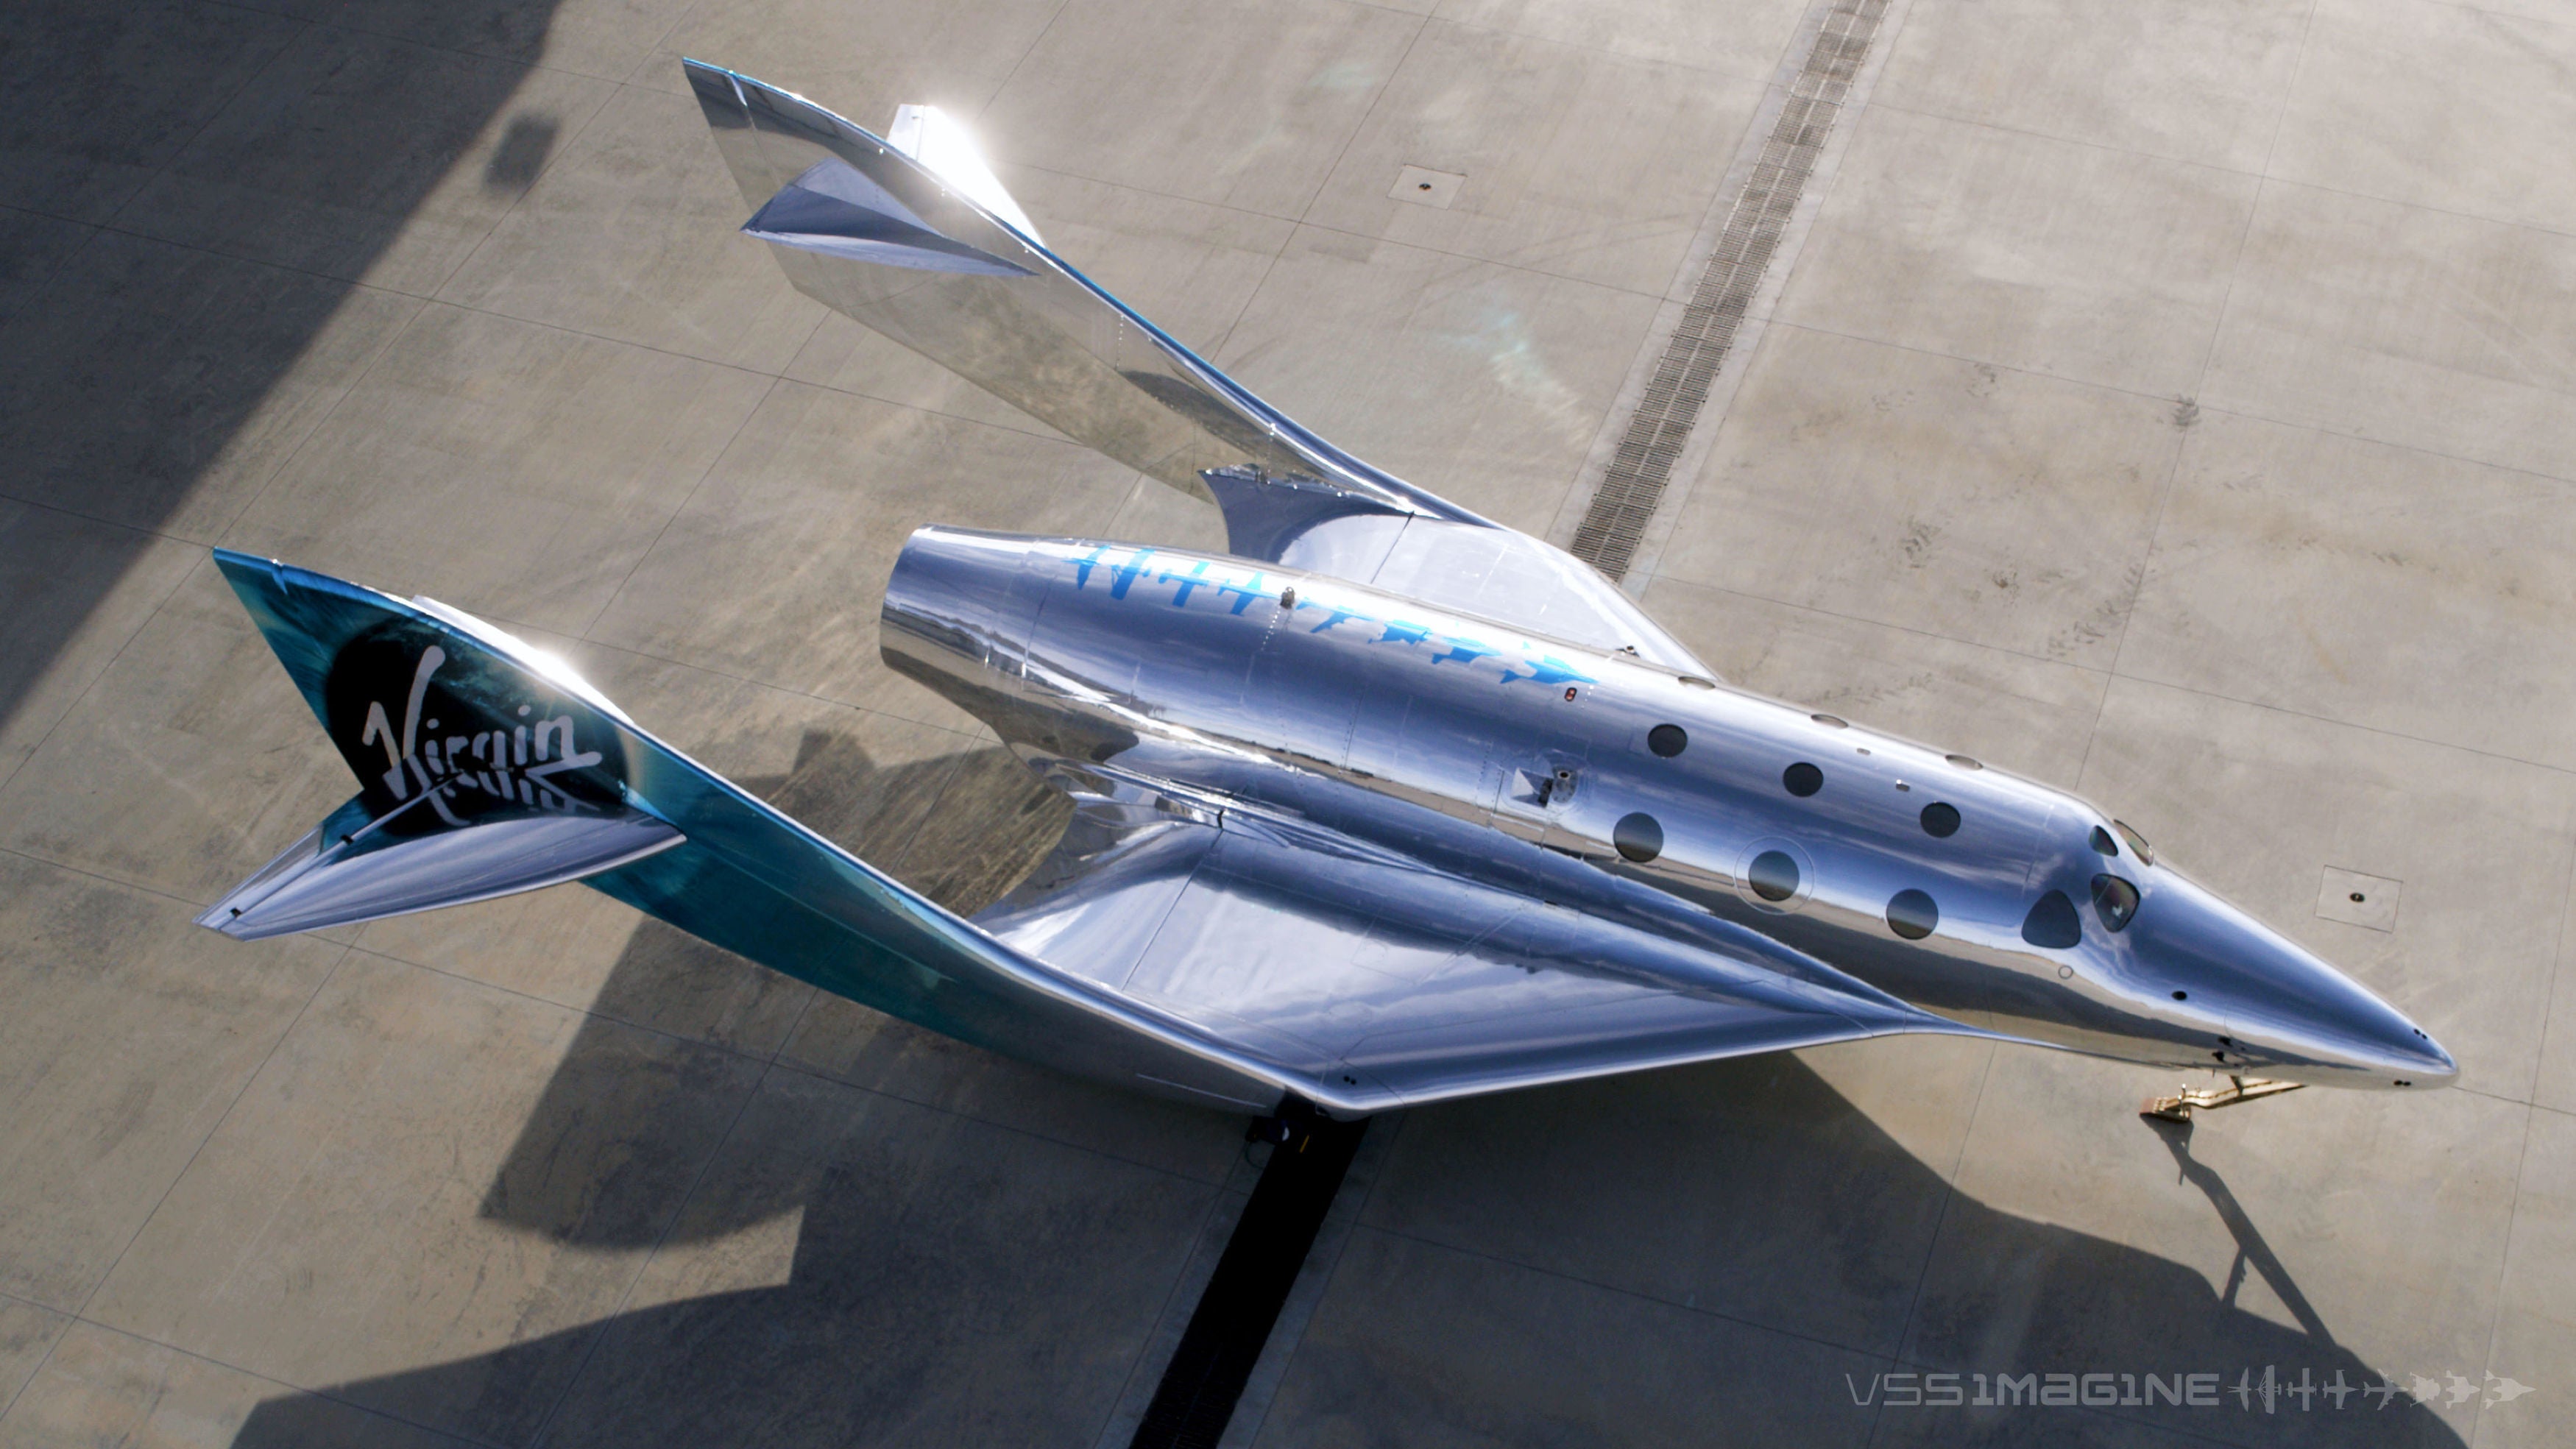 Virgin Galactic’s VSS Imagine, which could give a hint into how suborbital aircraft look over the coming years